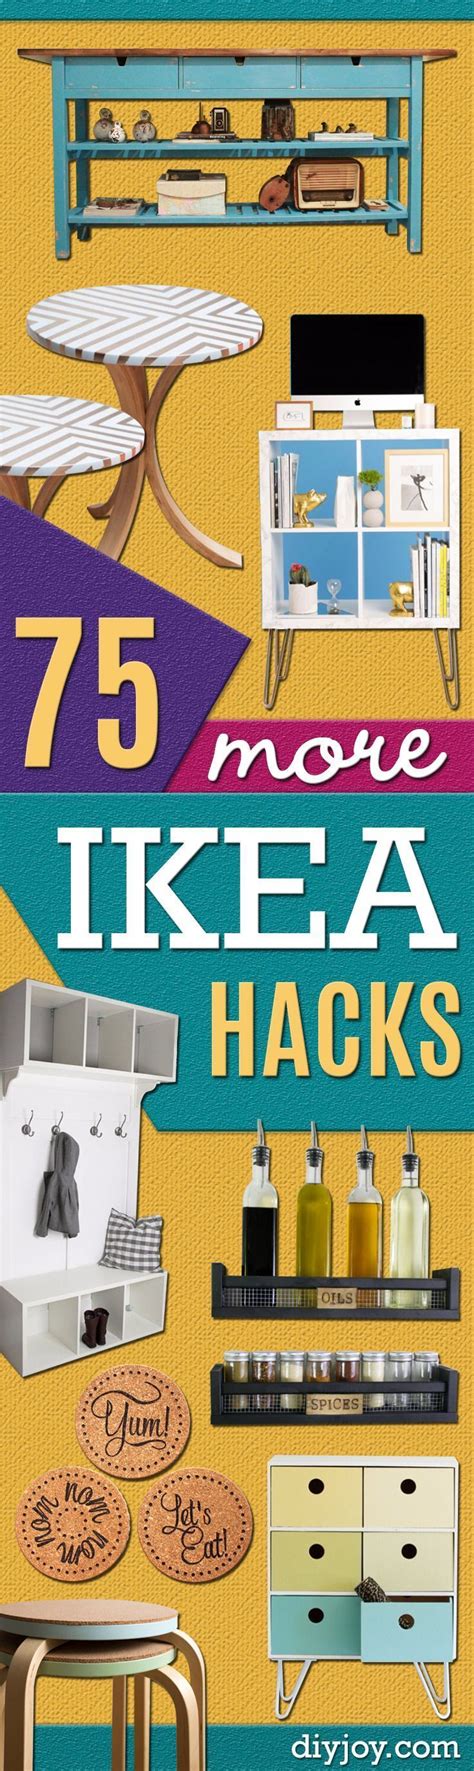 Best IKEA Hacks and DIY Hack Ideas for Furniture Projects and Home Decor from IKEA -Creative ...